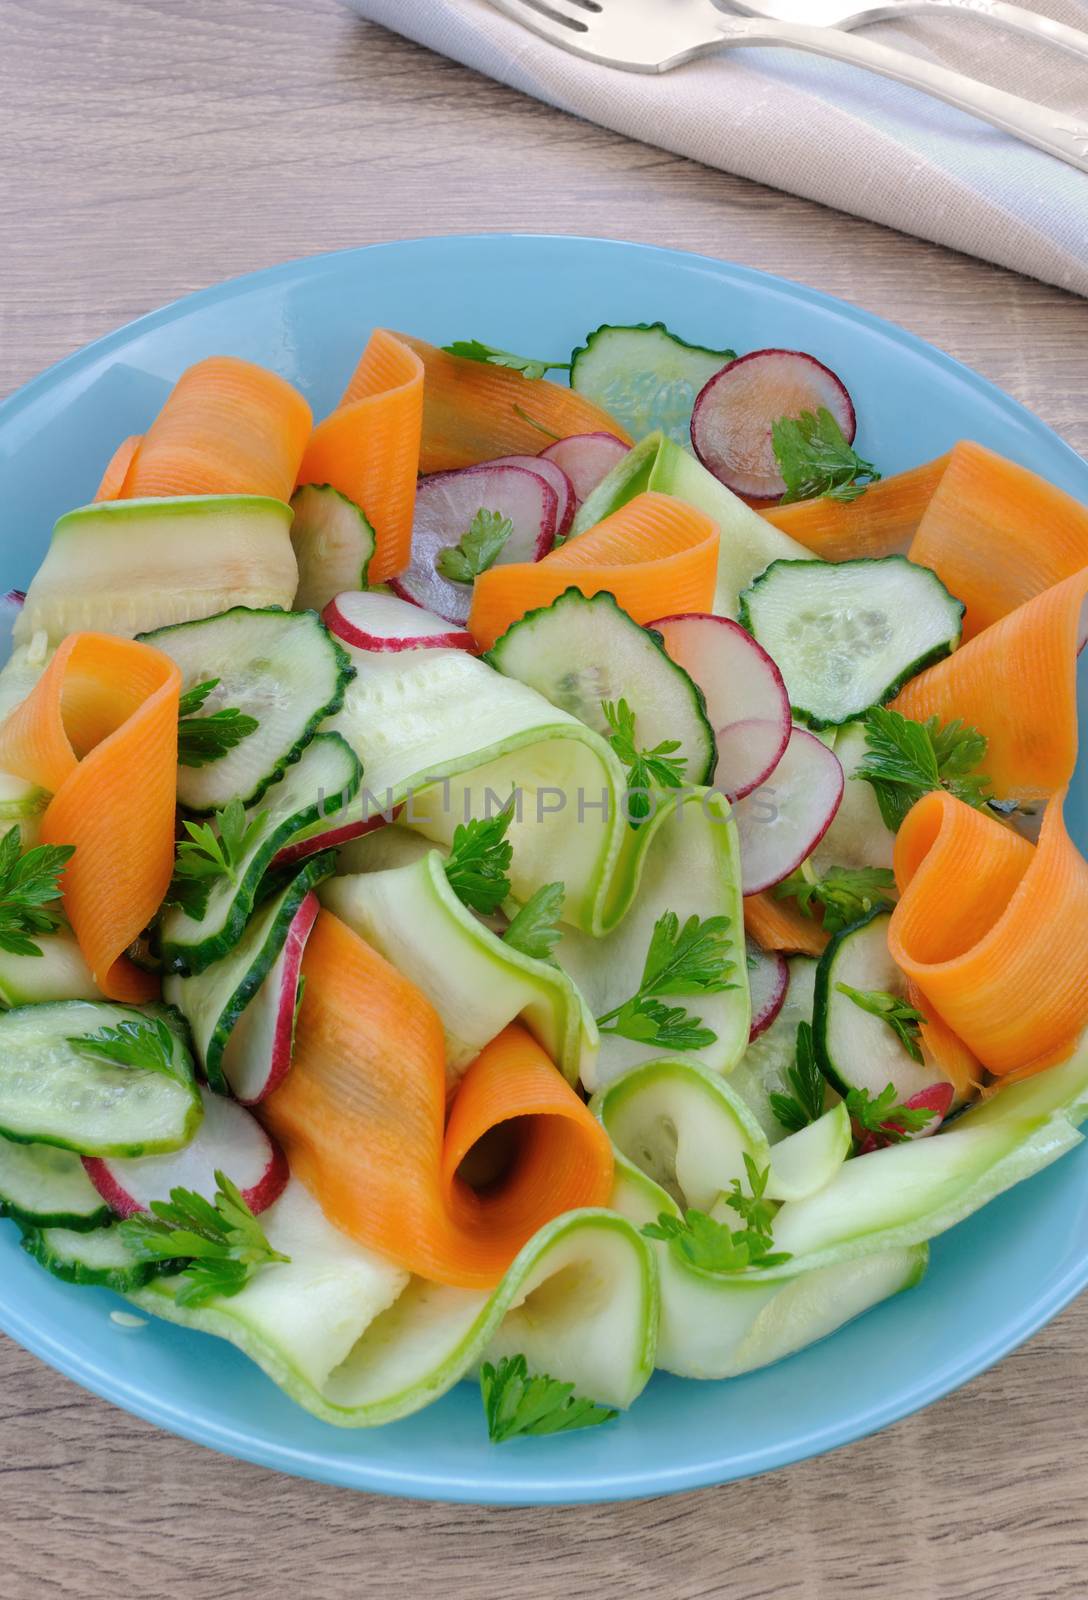 vegetable salad by Apolonia